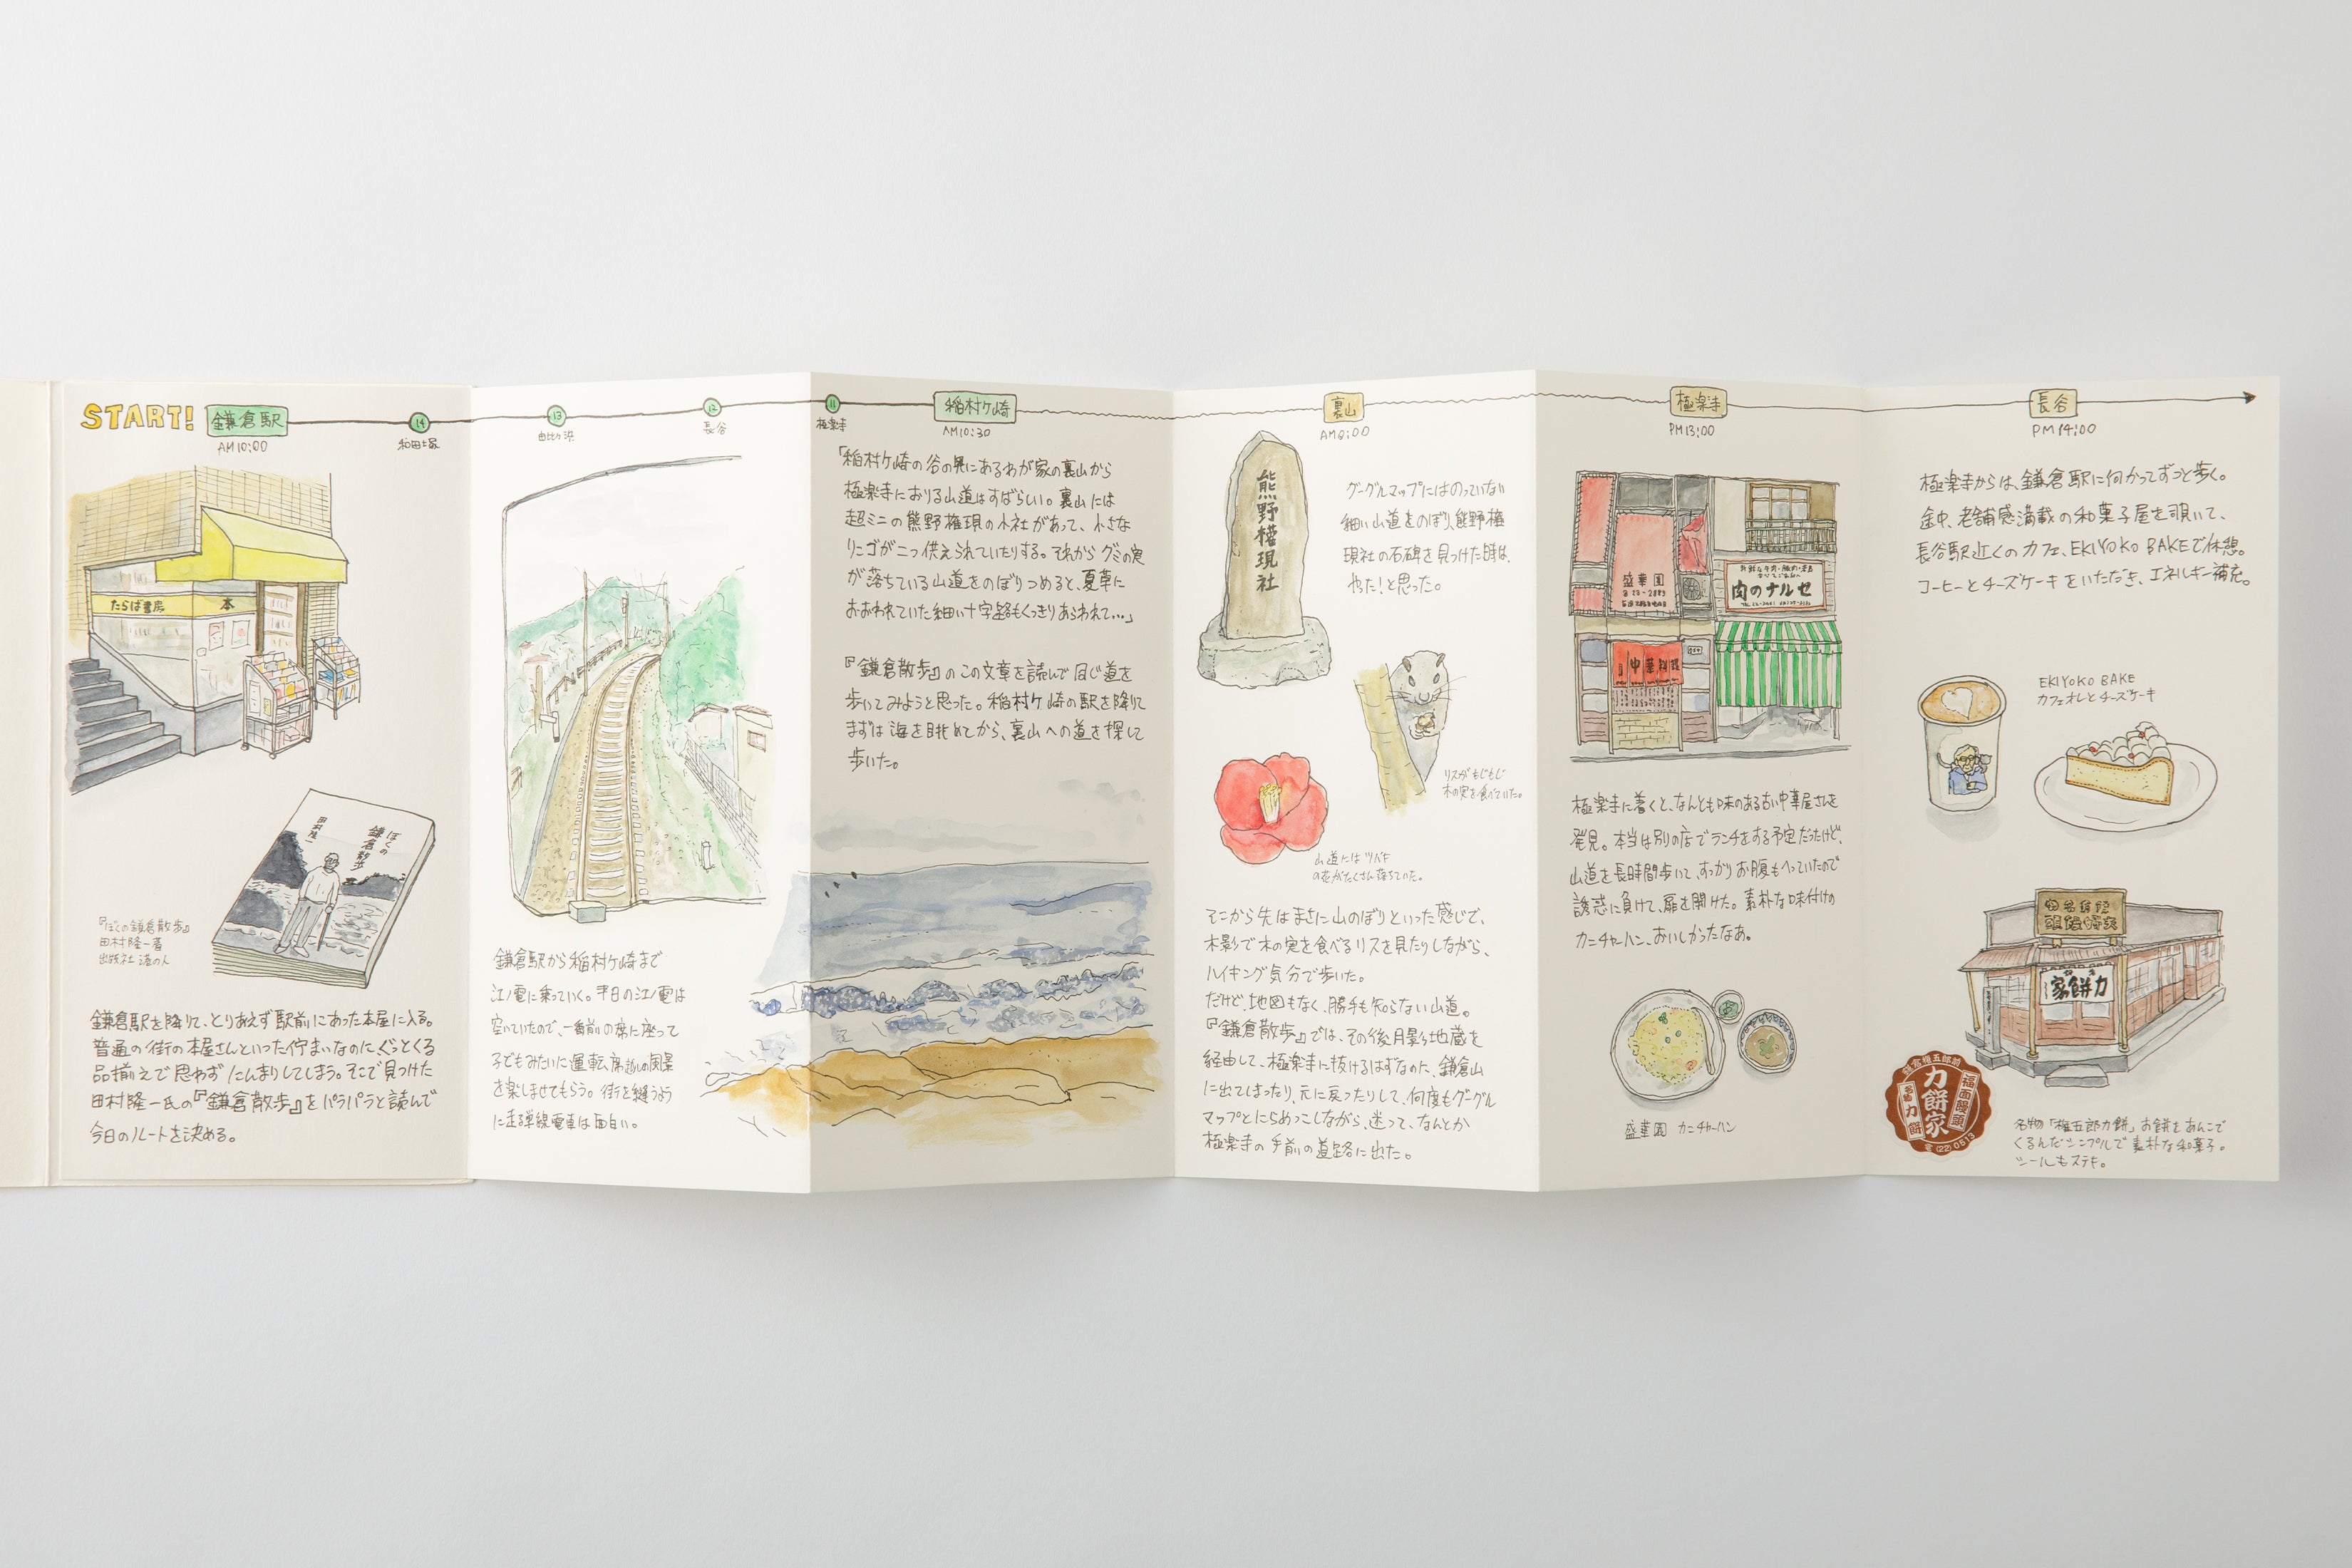 Draw, make a collage, arrange photos, tickets or labels or use the folded-out paper to write your travel itinerary, or ideas and plans for the year.